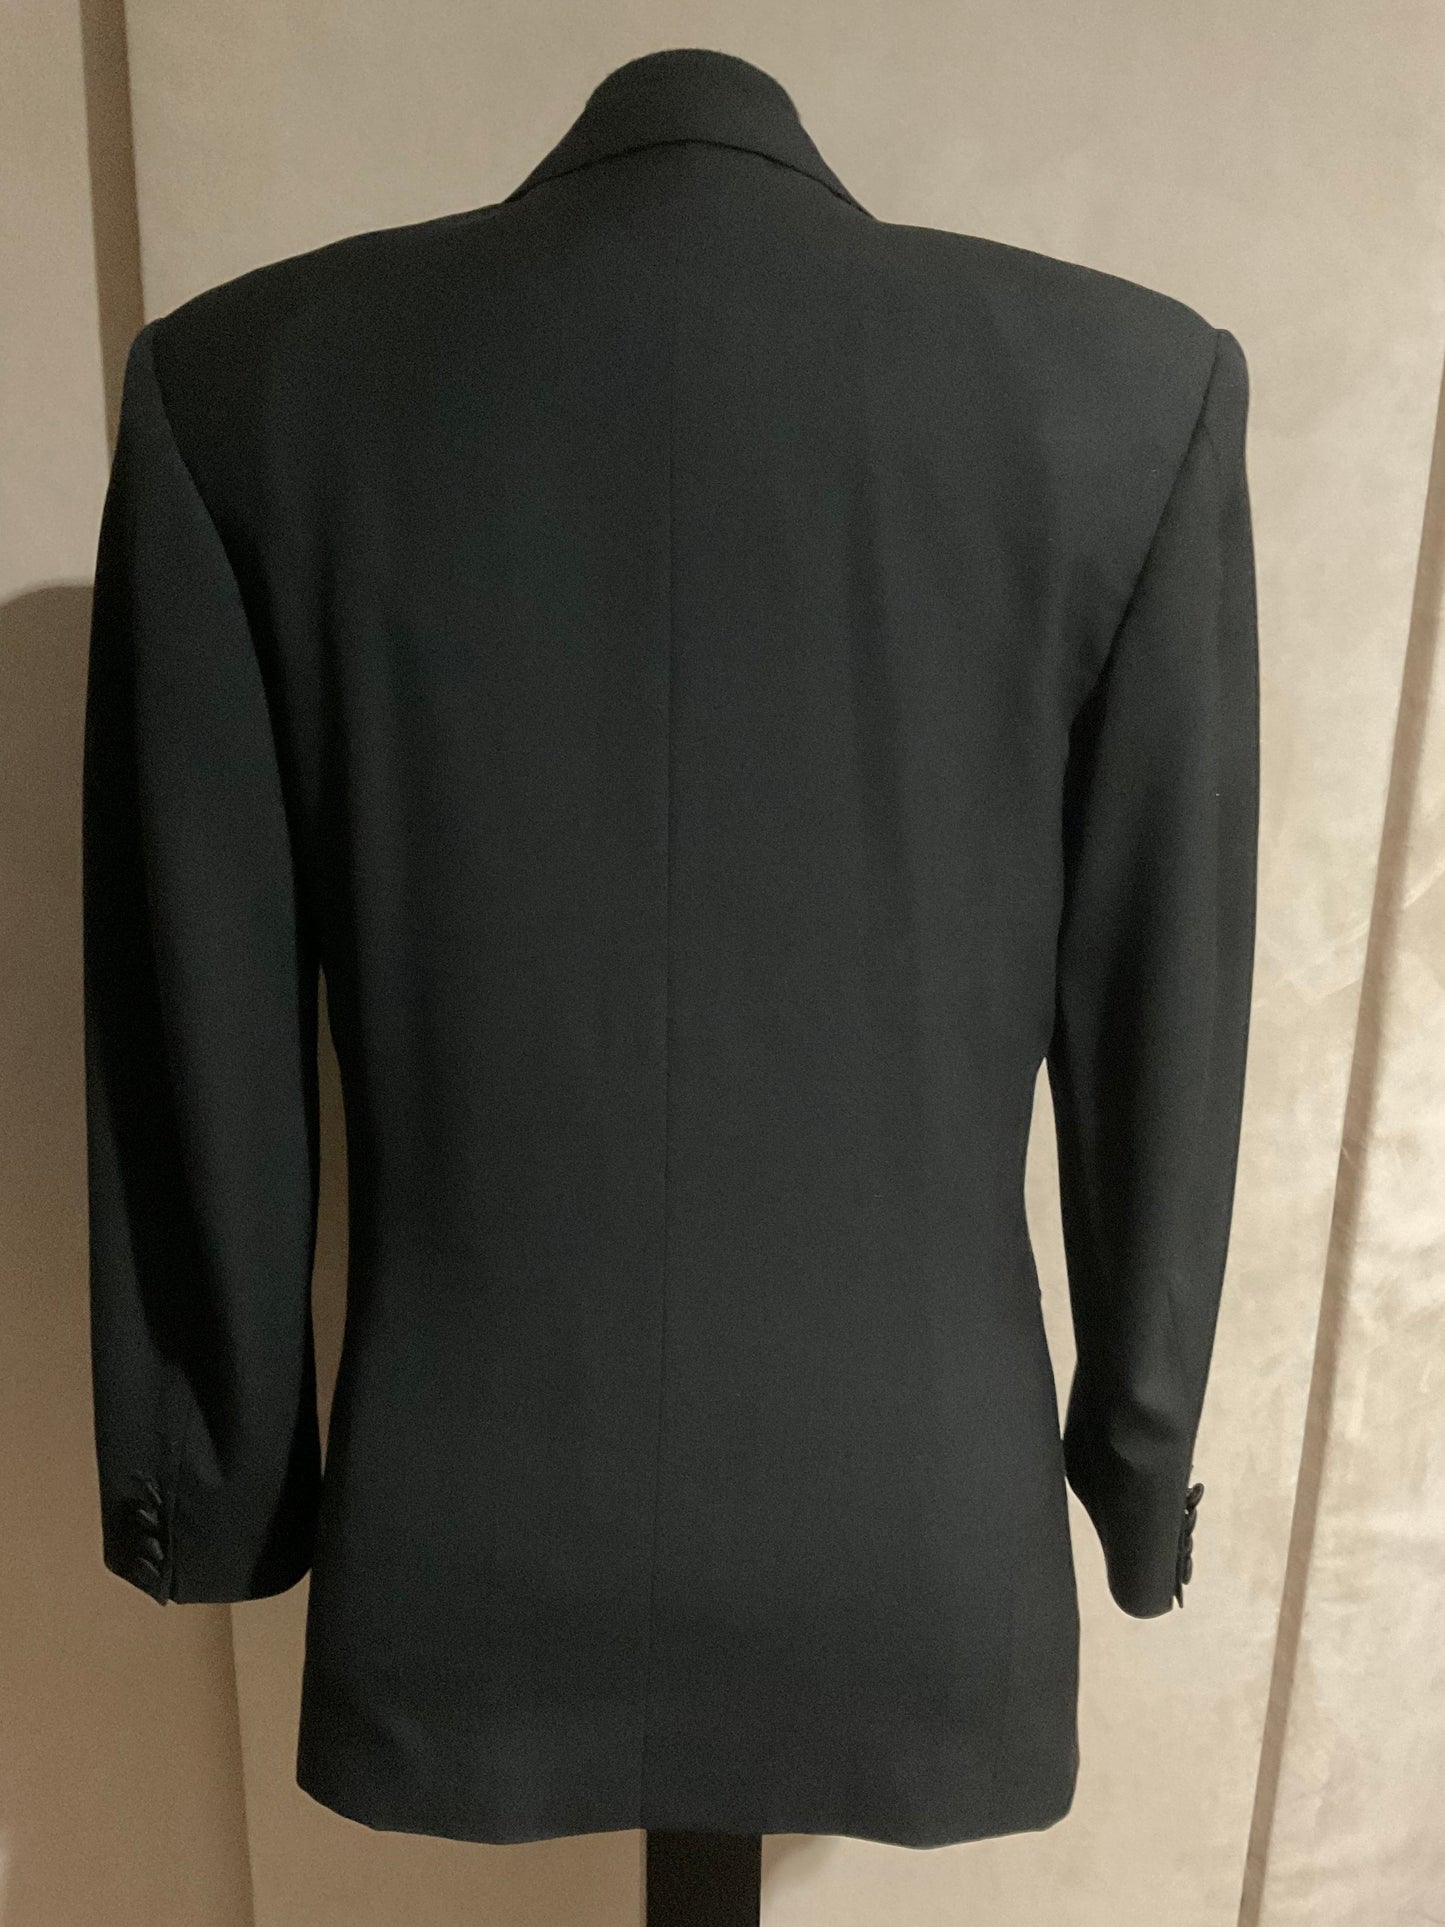 R P TUXEDO / DOUBLE BREASTED / BLACK / 40 REG / MADE IN ITALY